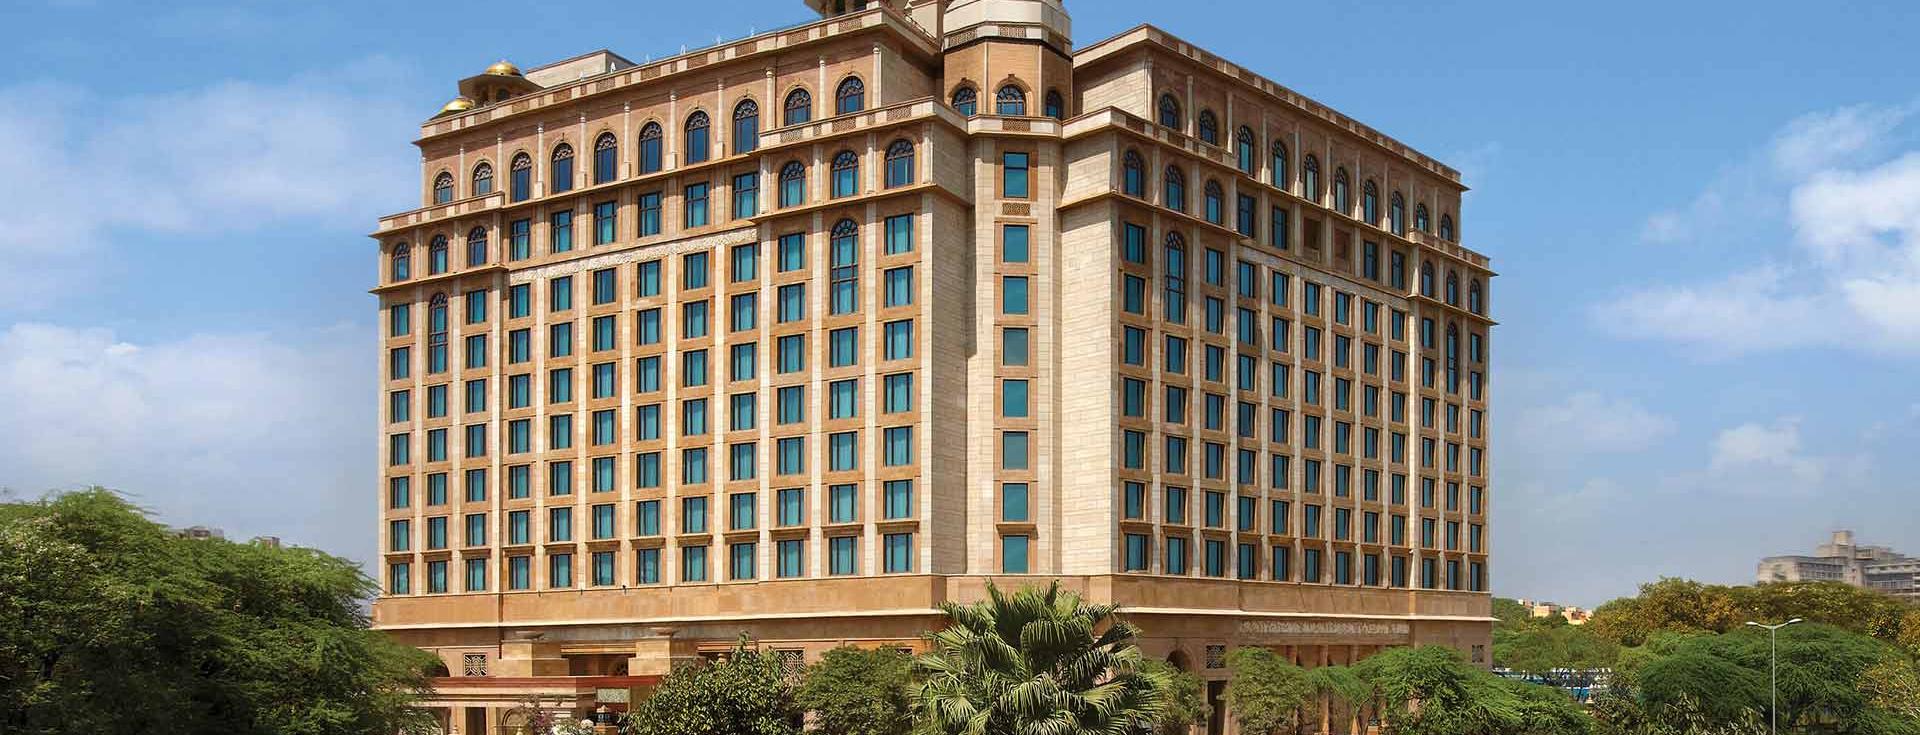 THE LEELA PALACE NEW DELHI WINS THE TITLE OF FAVOURITE BUSINESS HOTEL AT THE 8TH EDITION OF CONDÉ NAST TRAVELLER READERS’ TRAVEL AWARDS